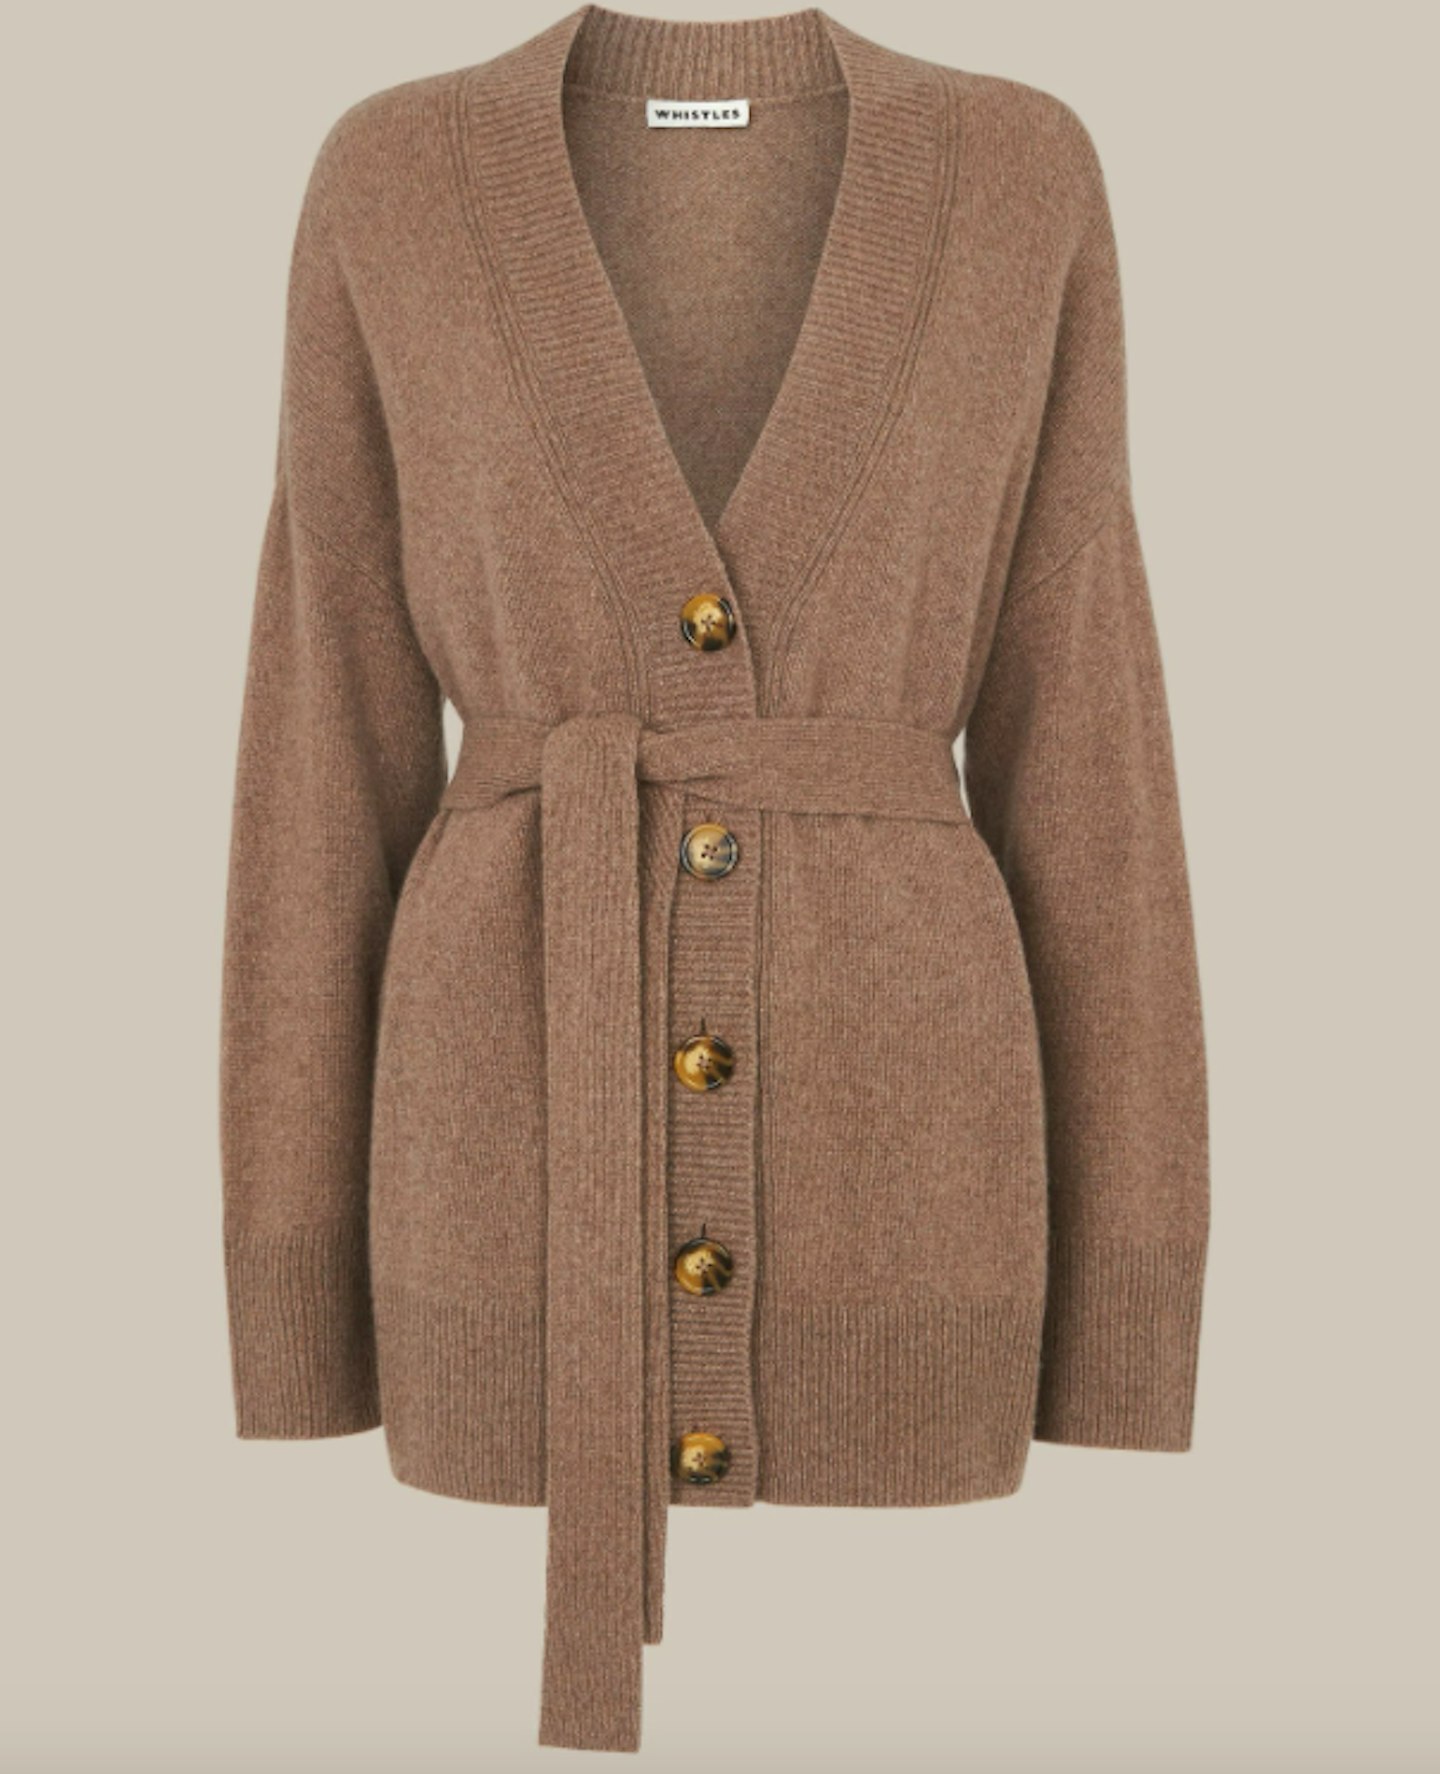 Whistles, Belted Cashmere Cardigan, WAS £249 NOW £185